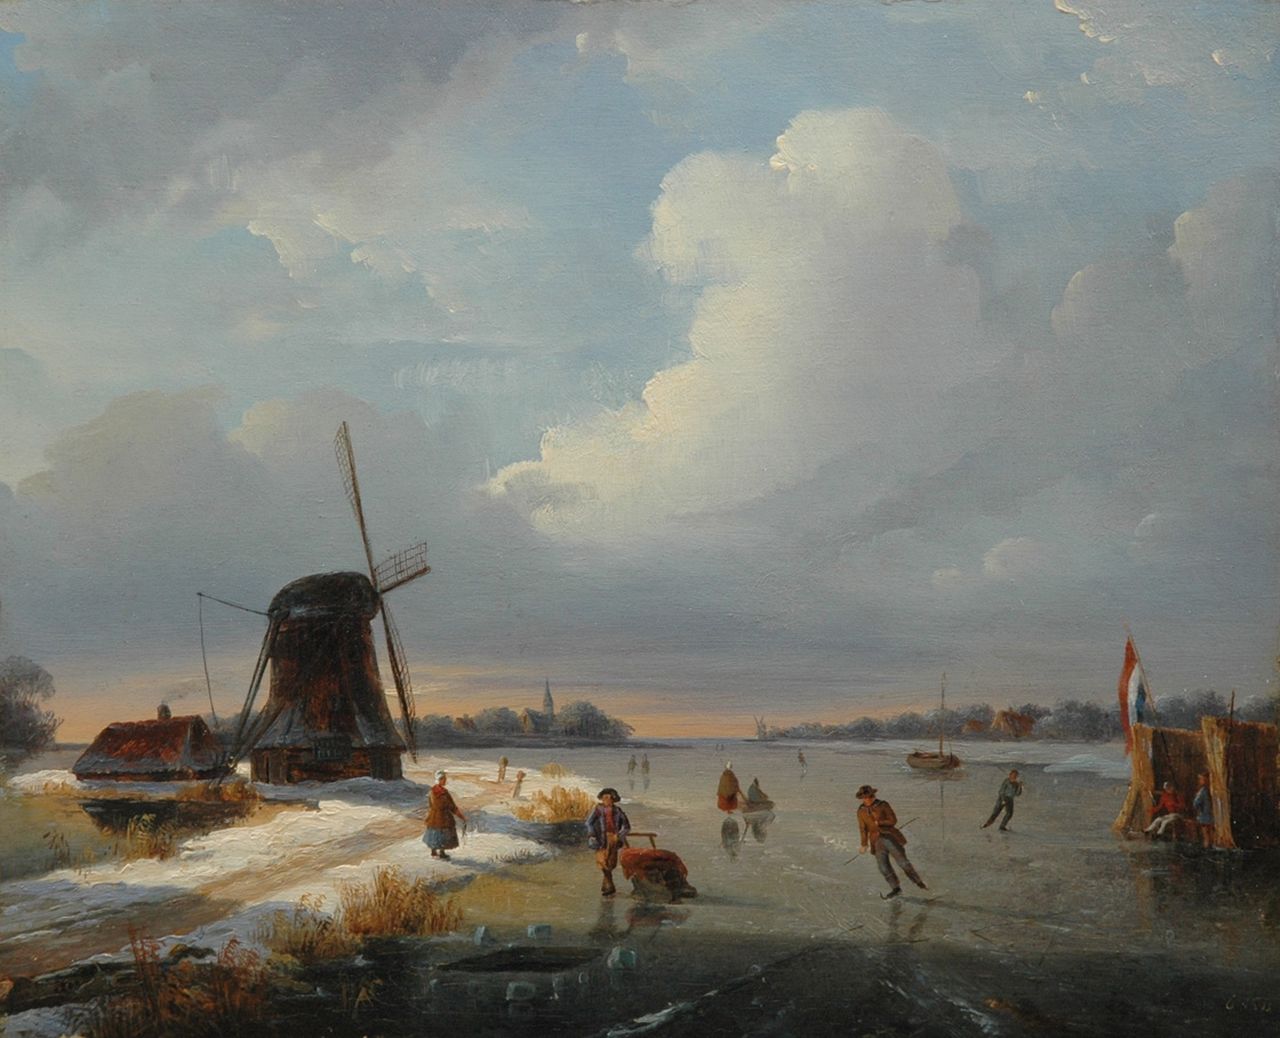 Vos C.A.  | Christoffel Albertus Vos, A winter landscape with skaters, oil on panel 27.3 x 33.6 cm, signed l.r. and datedd 18[..]